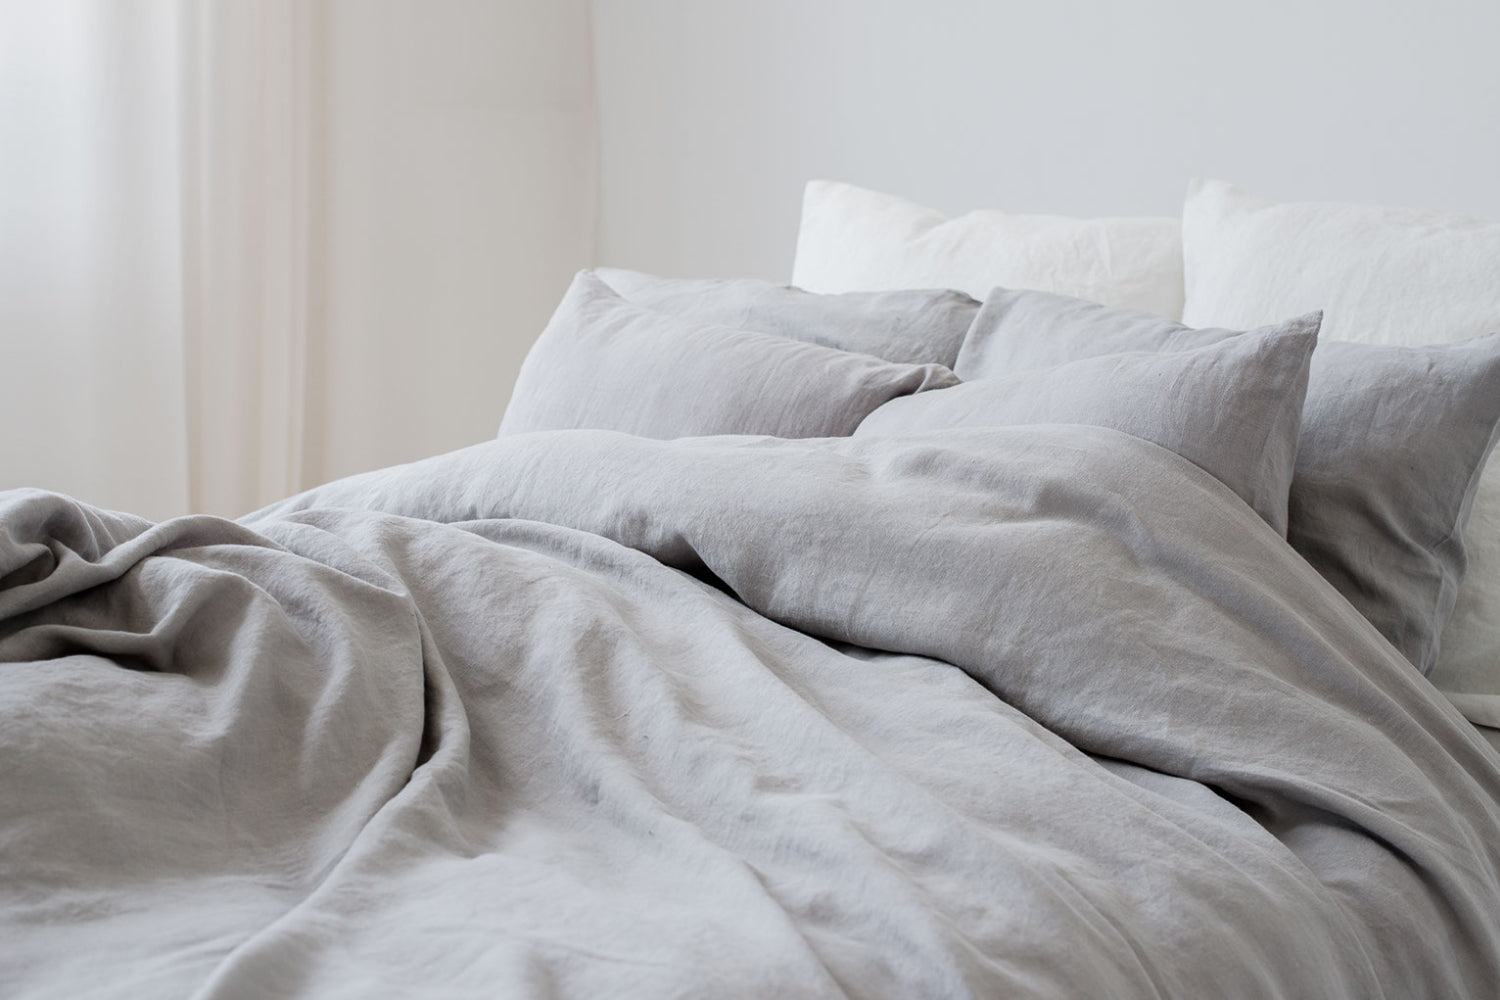 4 REASONS WHY LINEN BEDDING IS A WONDERFUL GIFT